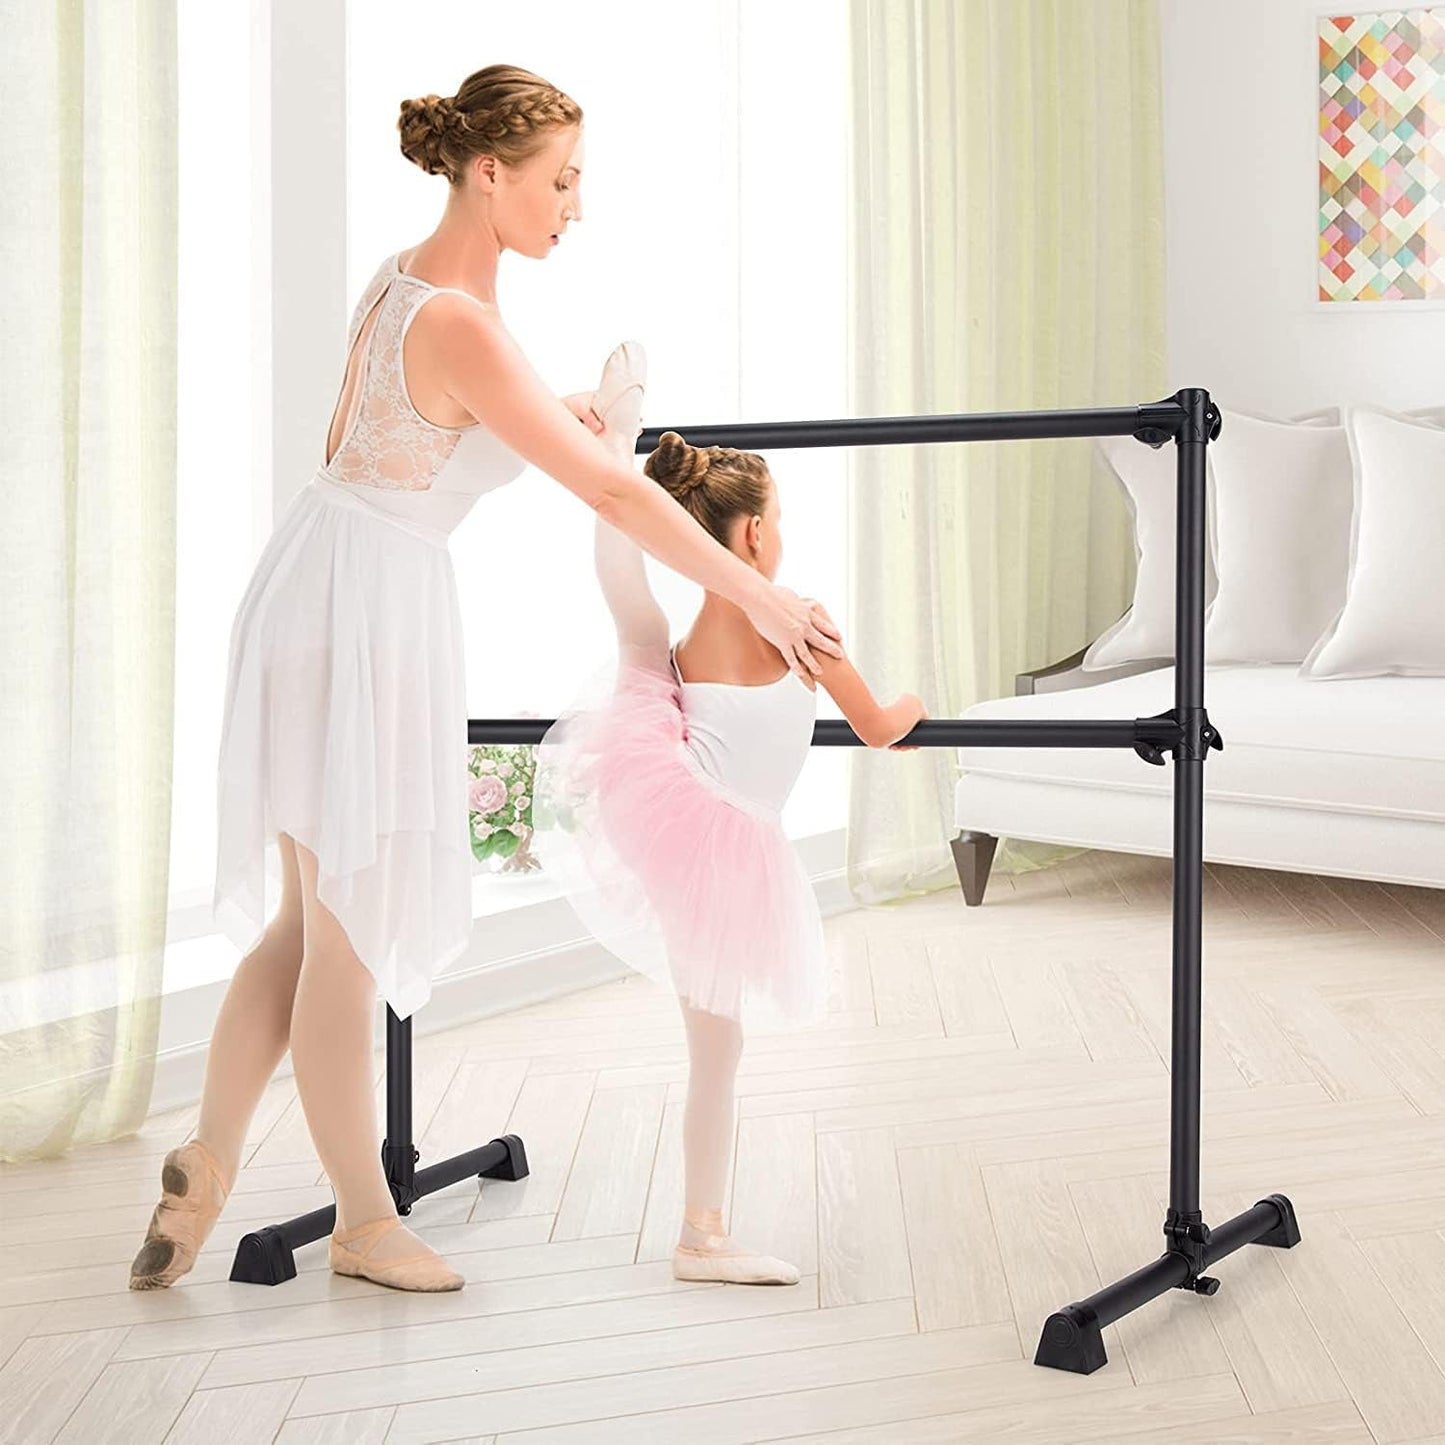 Portable Ballet Barre, 4FT Adjustable Double Freestanding Ballet Bar w/Anti-Skid Pad, Stable Base, Heavy-Duty Dancing Stretching Bar for Home, Fitness, Ballet